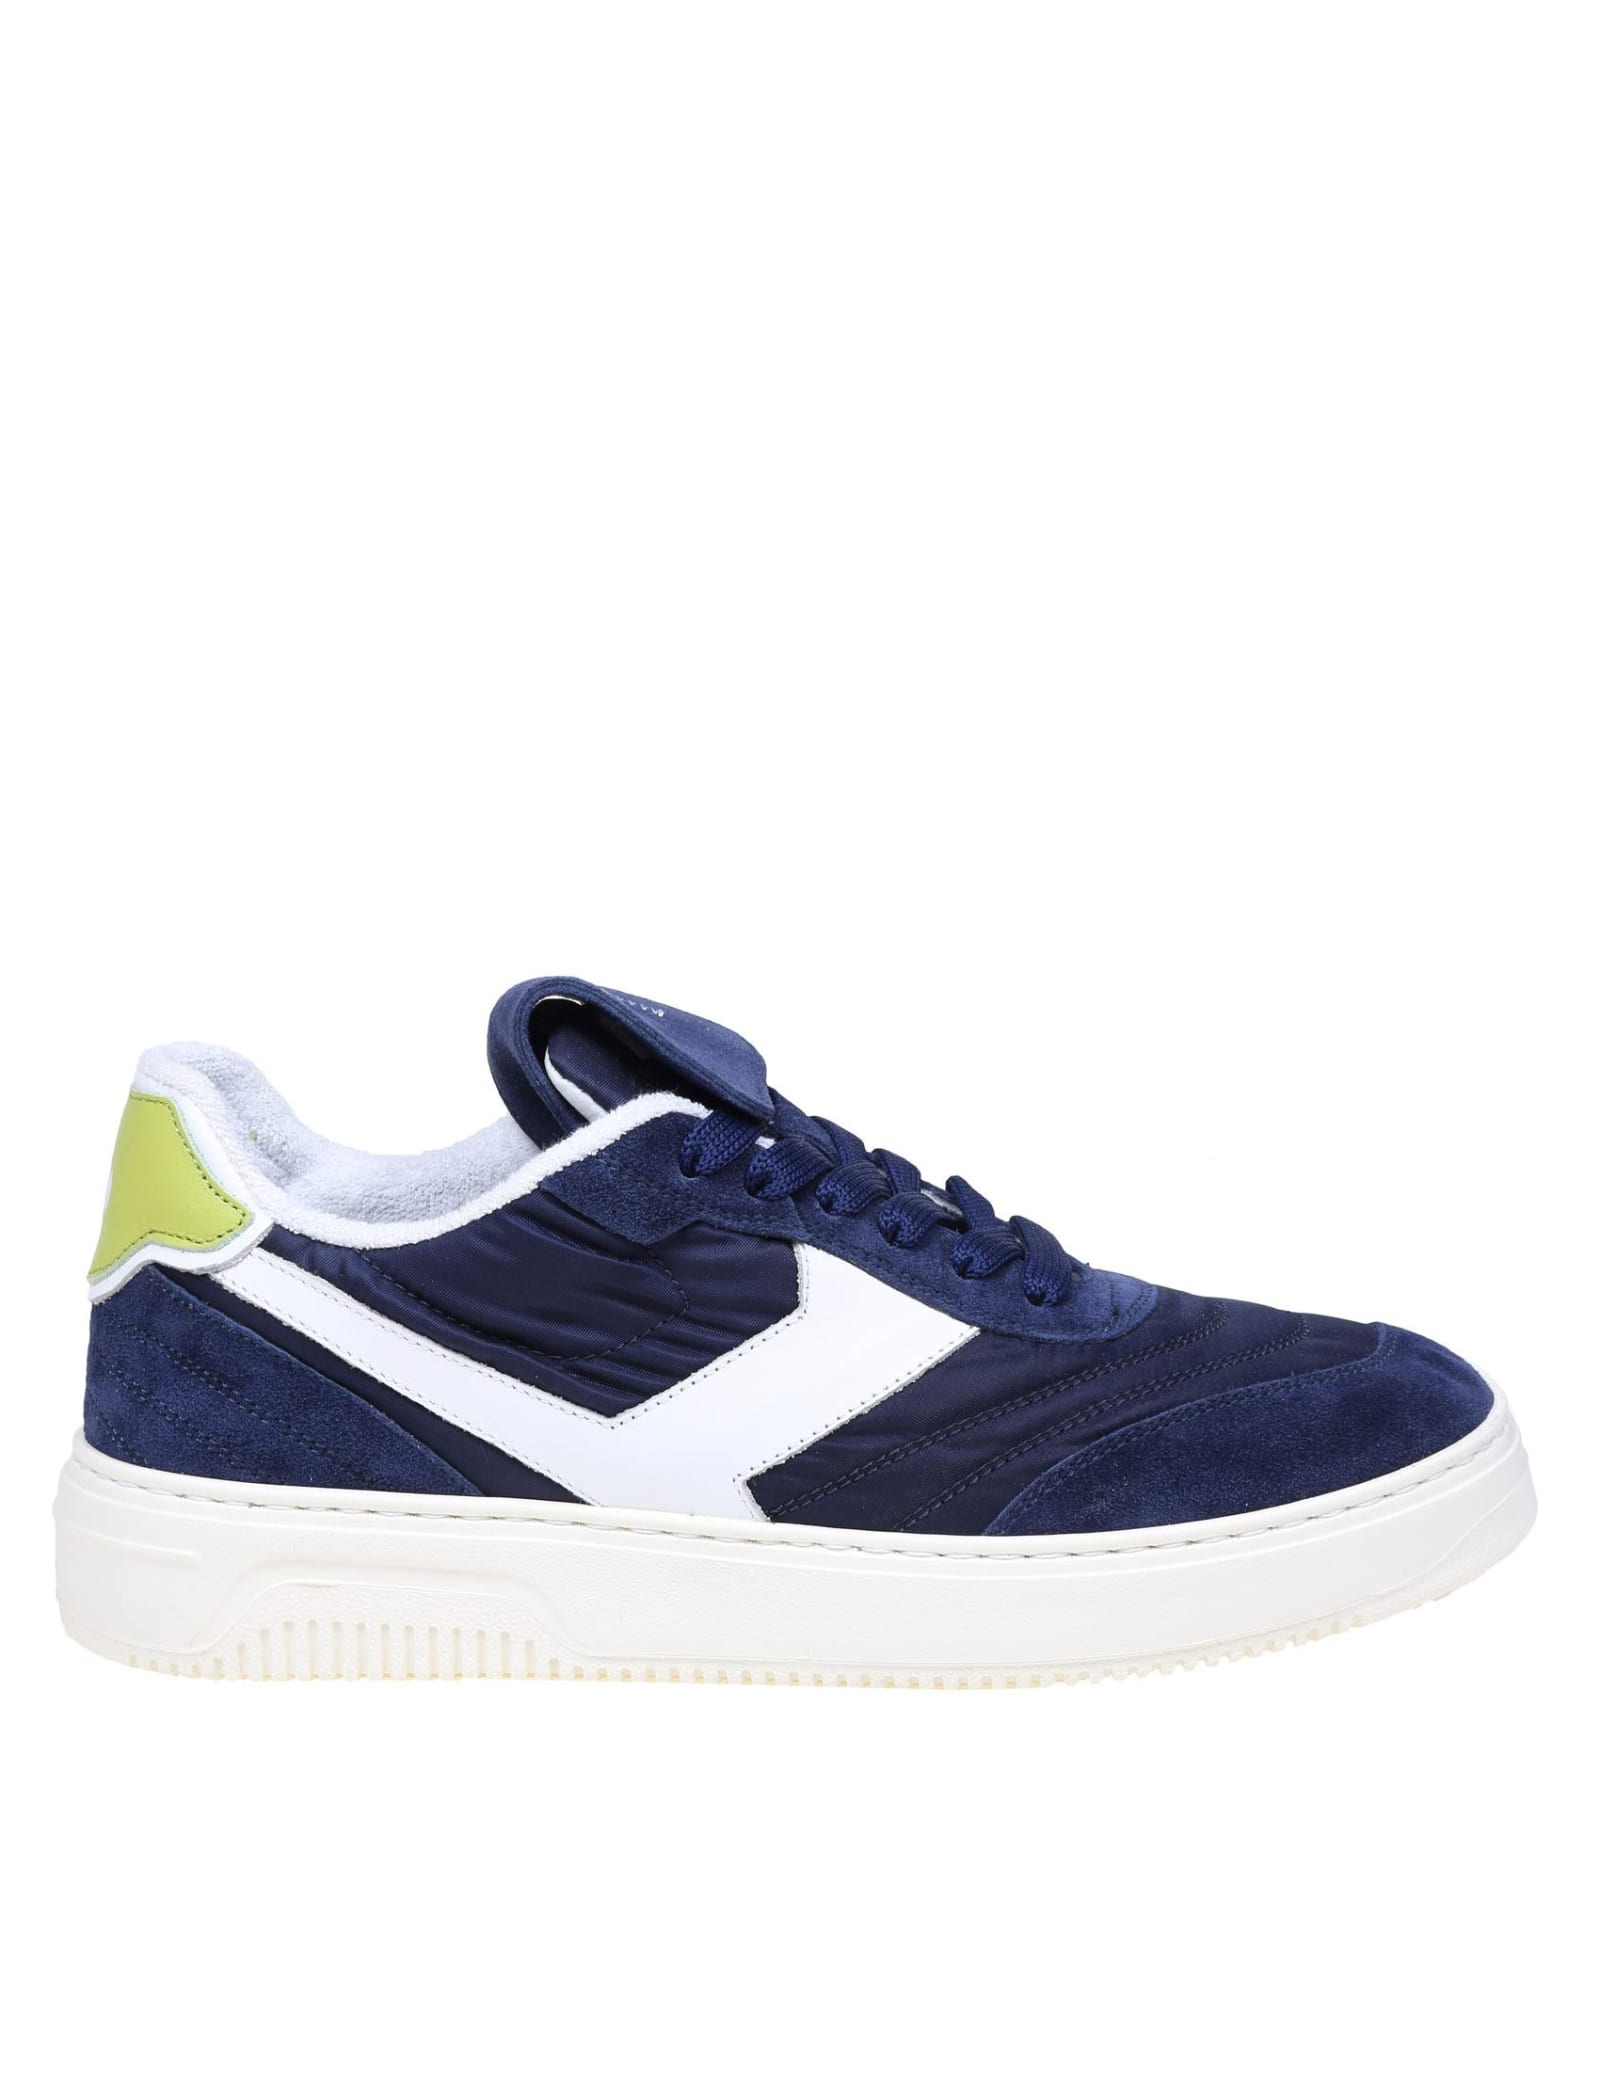 Pantofola D'Oro Sneaker In Suede And Blue Fabric